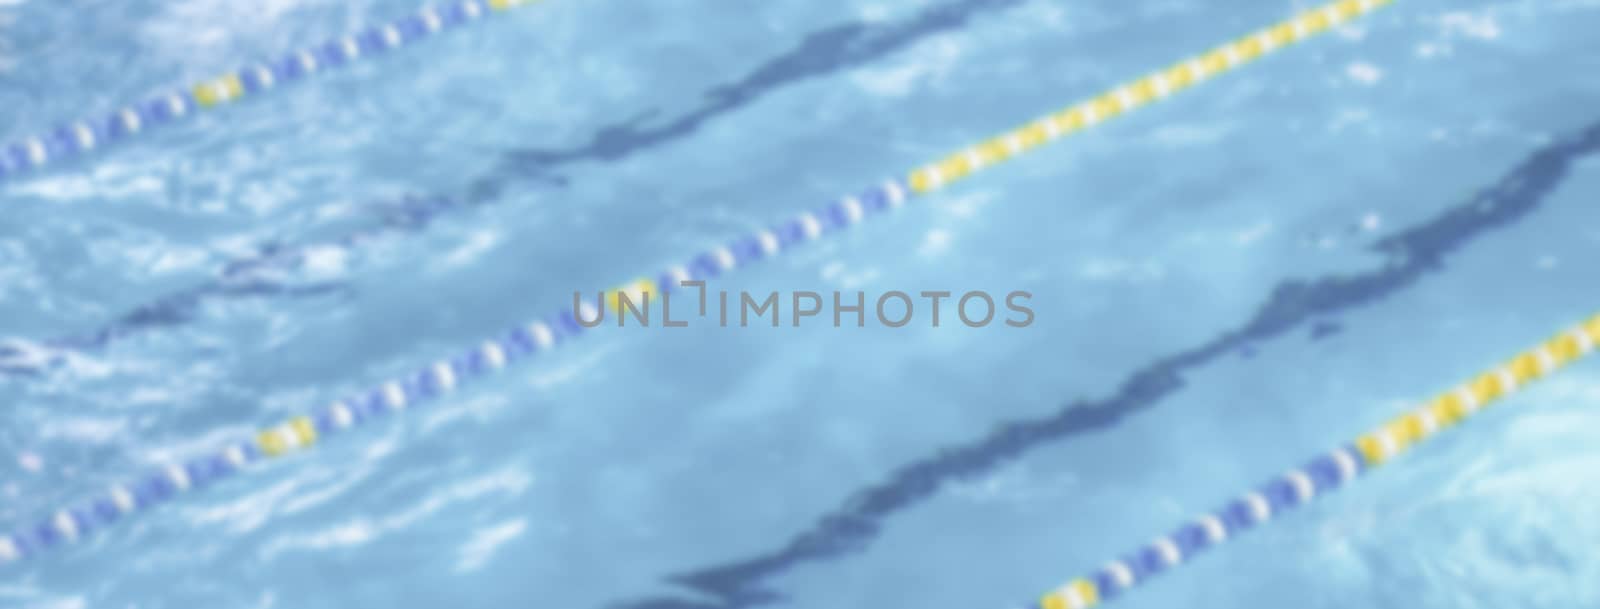 Defocused background with aerial view of a swimming pool with dividers. Intentionally blurred post production for bokeh effect